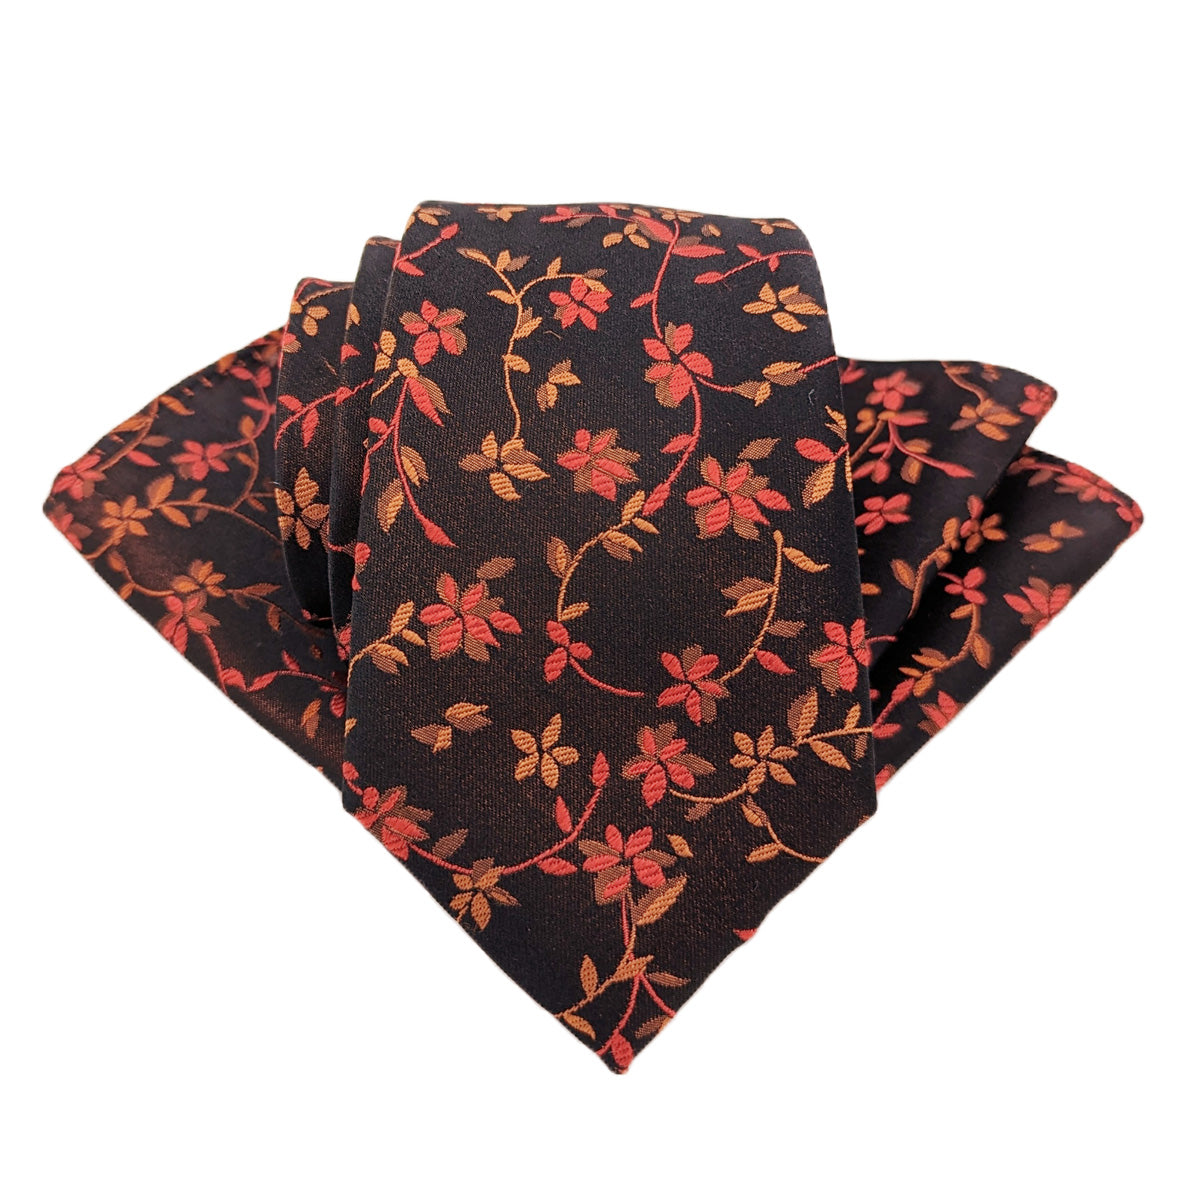 Flaming Red Floral Silk Pocket Square